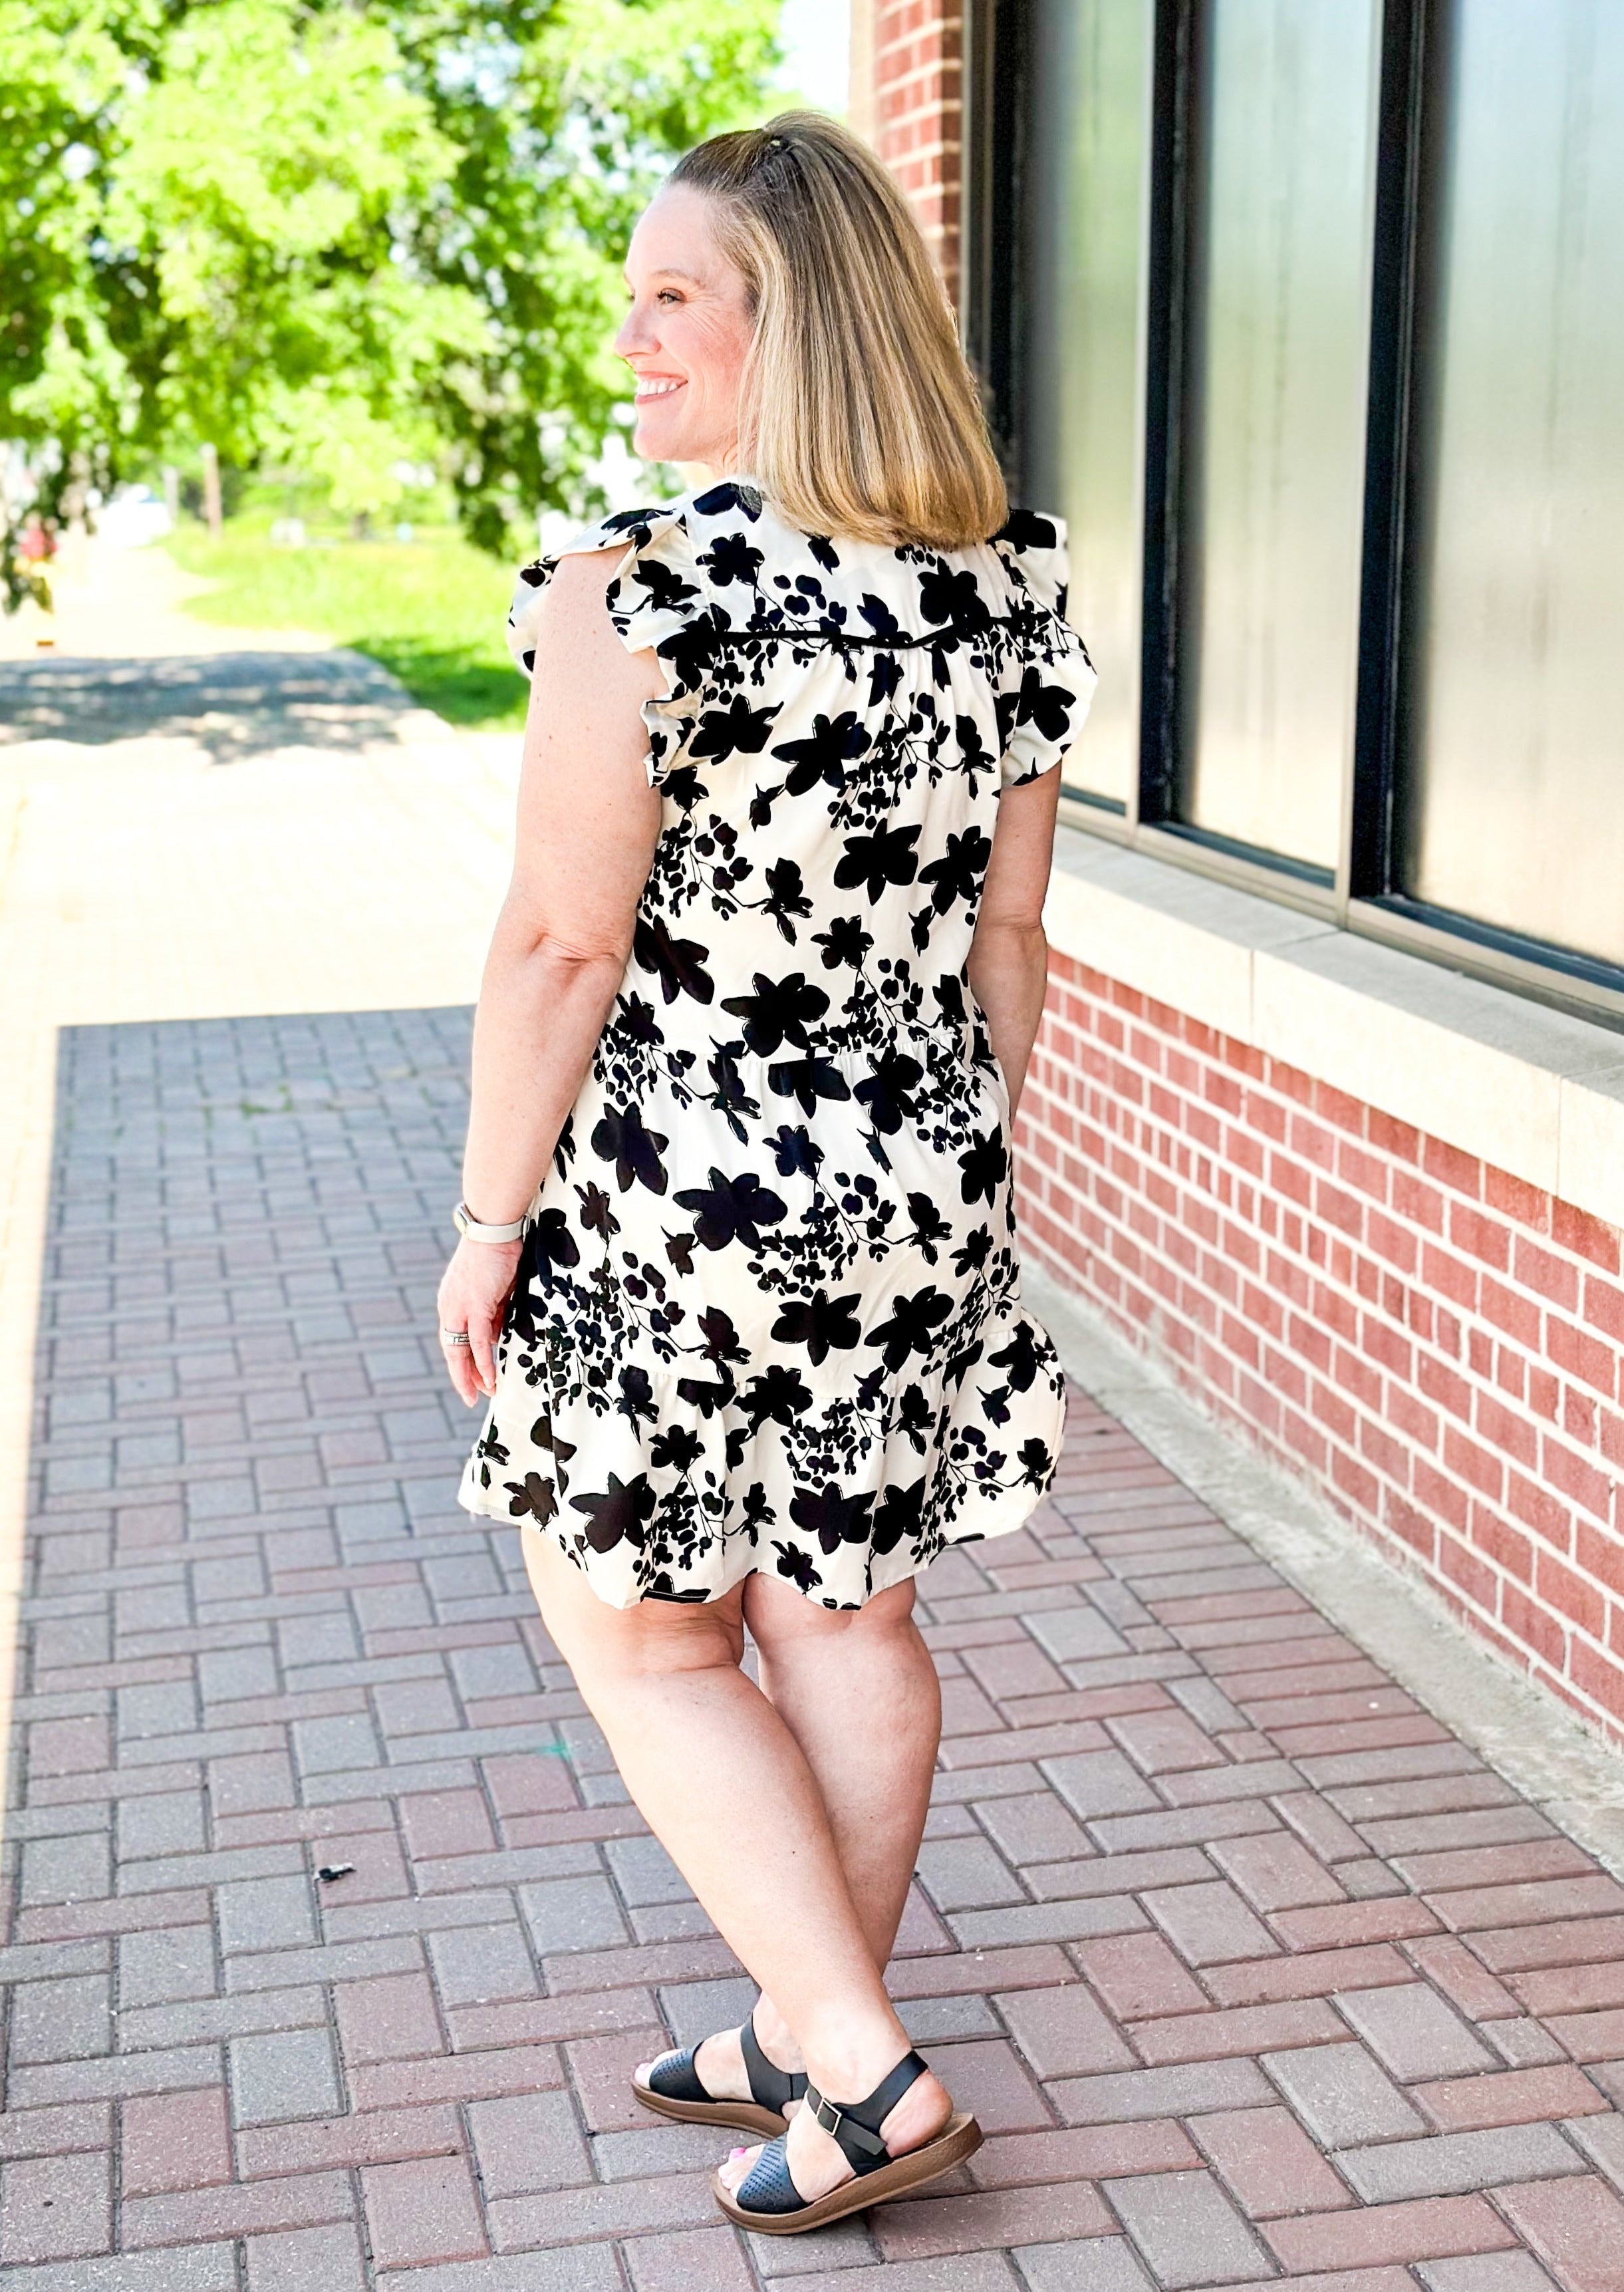 Cream with black floral pattern dress - short ruffle sleeve - v-neck - tiered - black piping just below bust